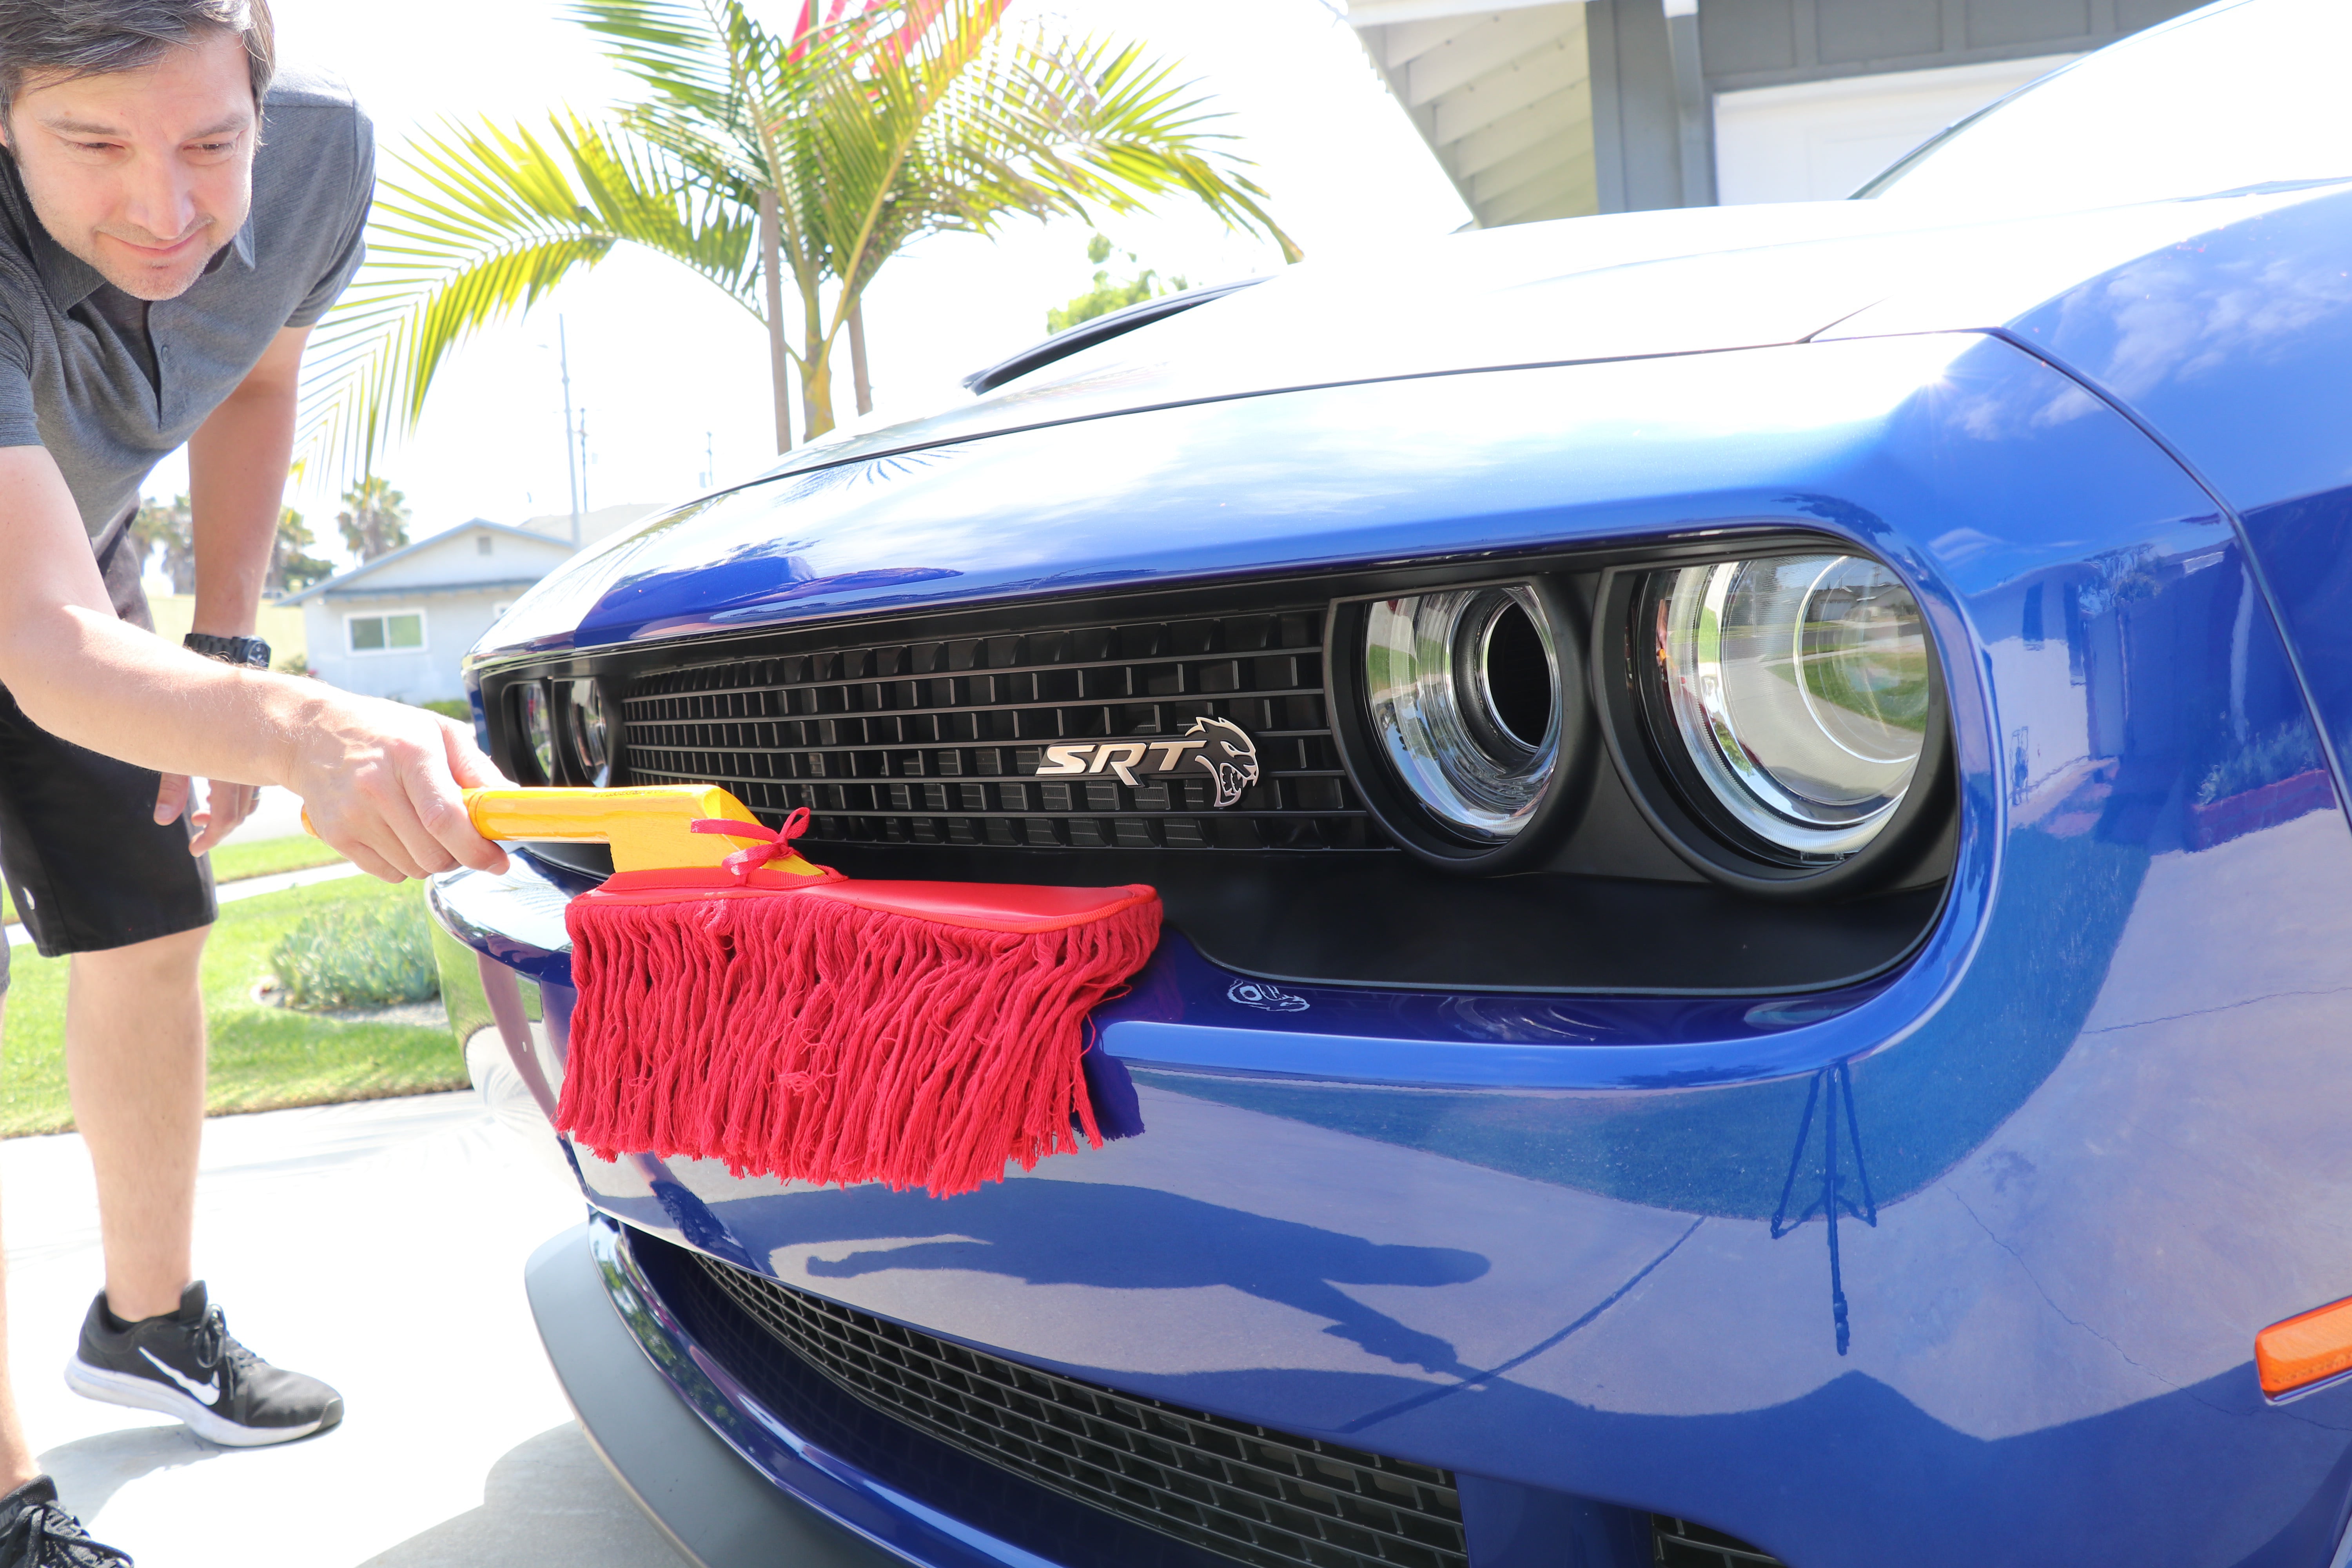 The Original 62442 California Car Duster with 15-in Cleaning Head, Red